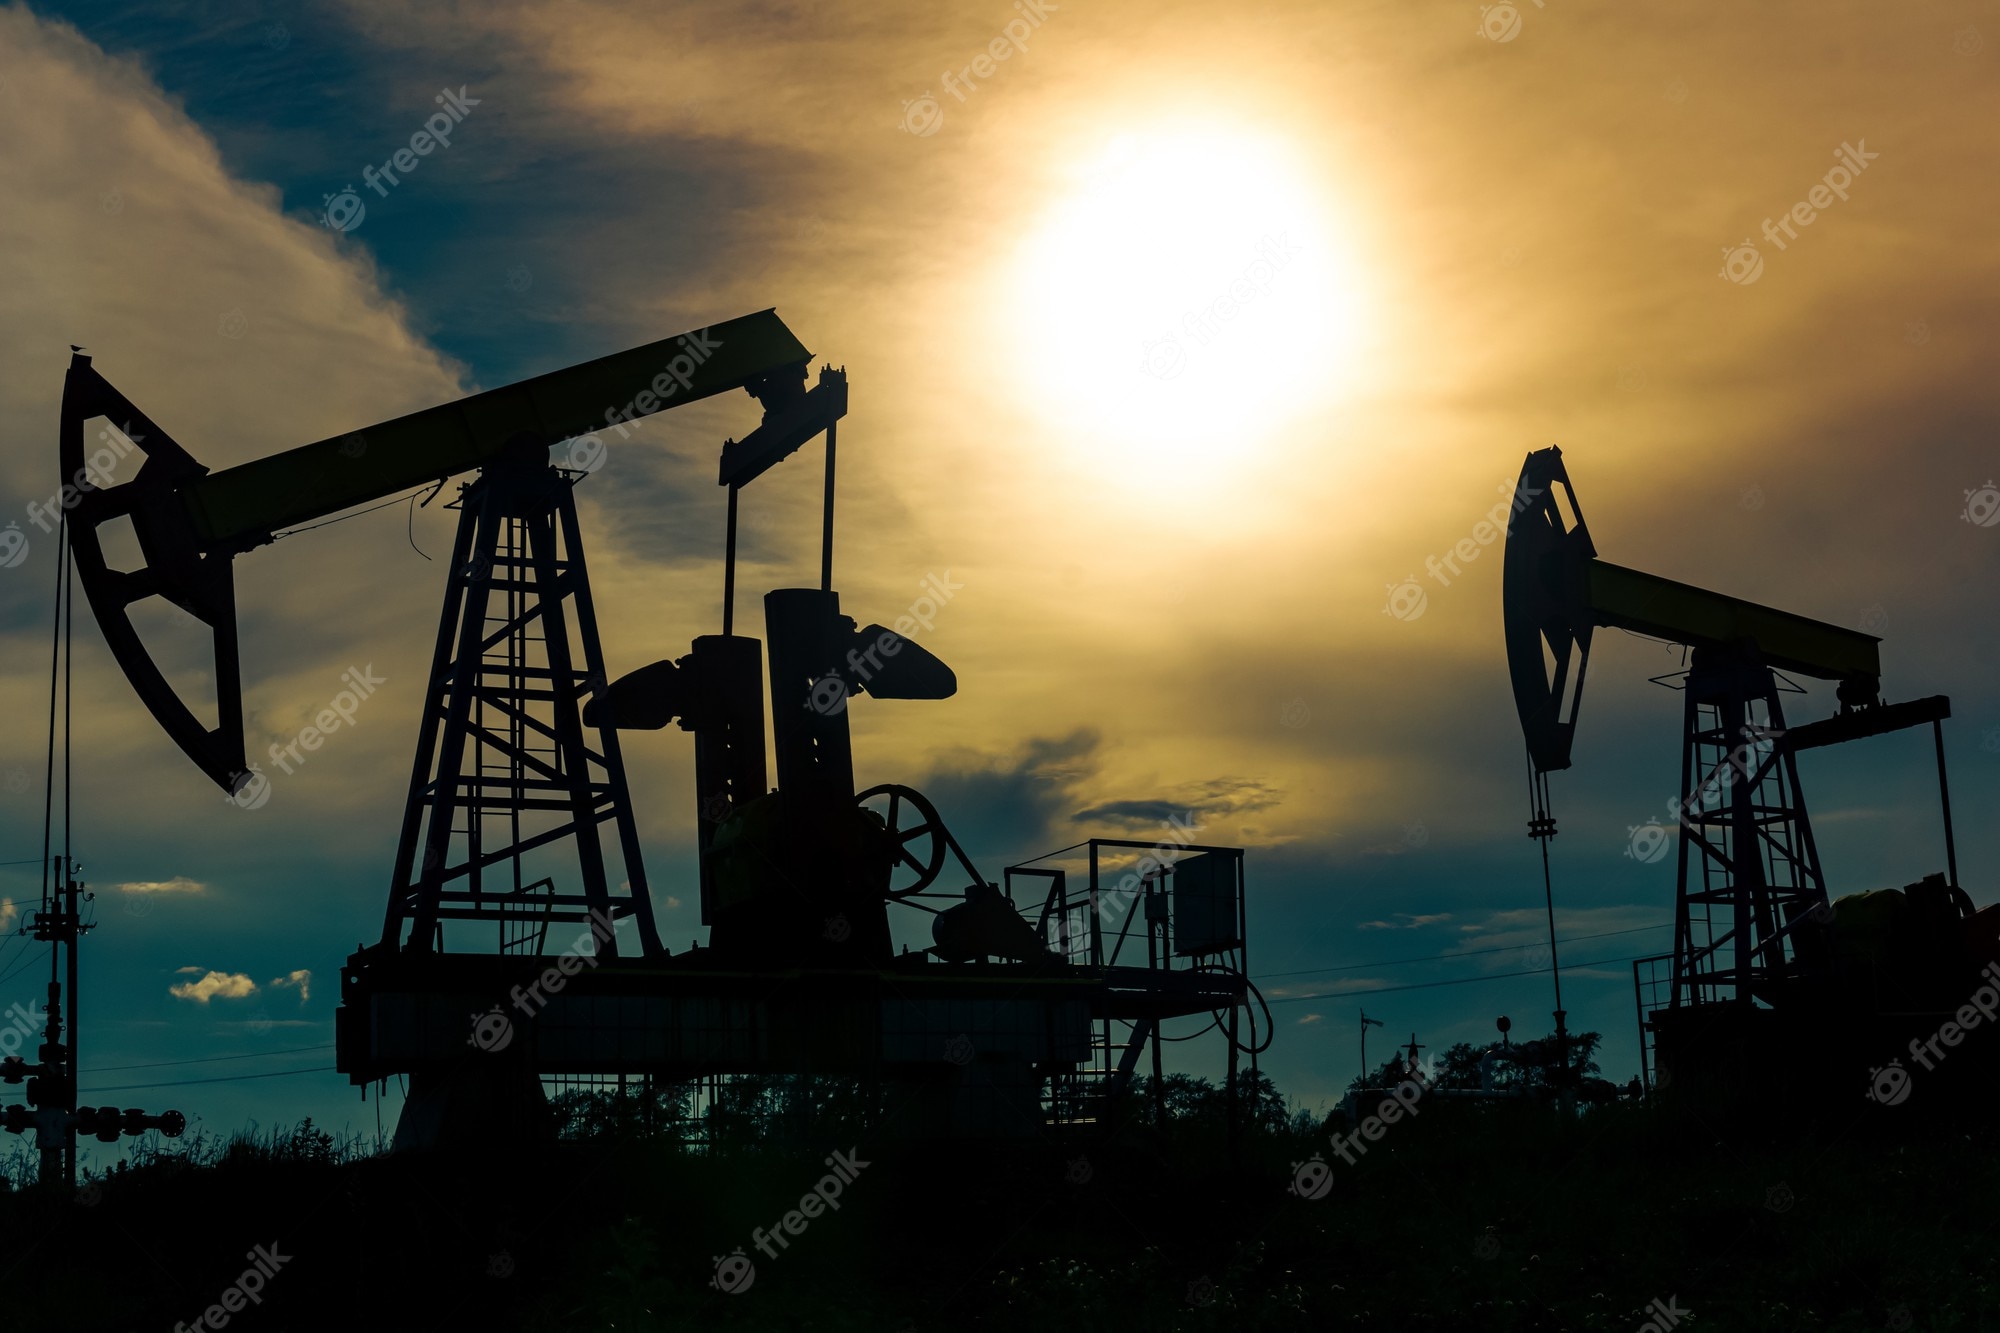 Page gas well images free vectors stock photos psd